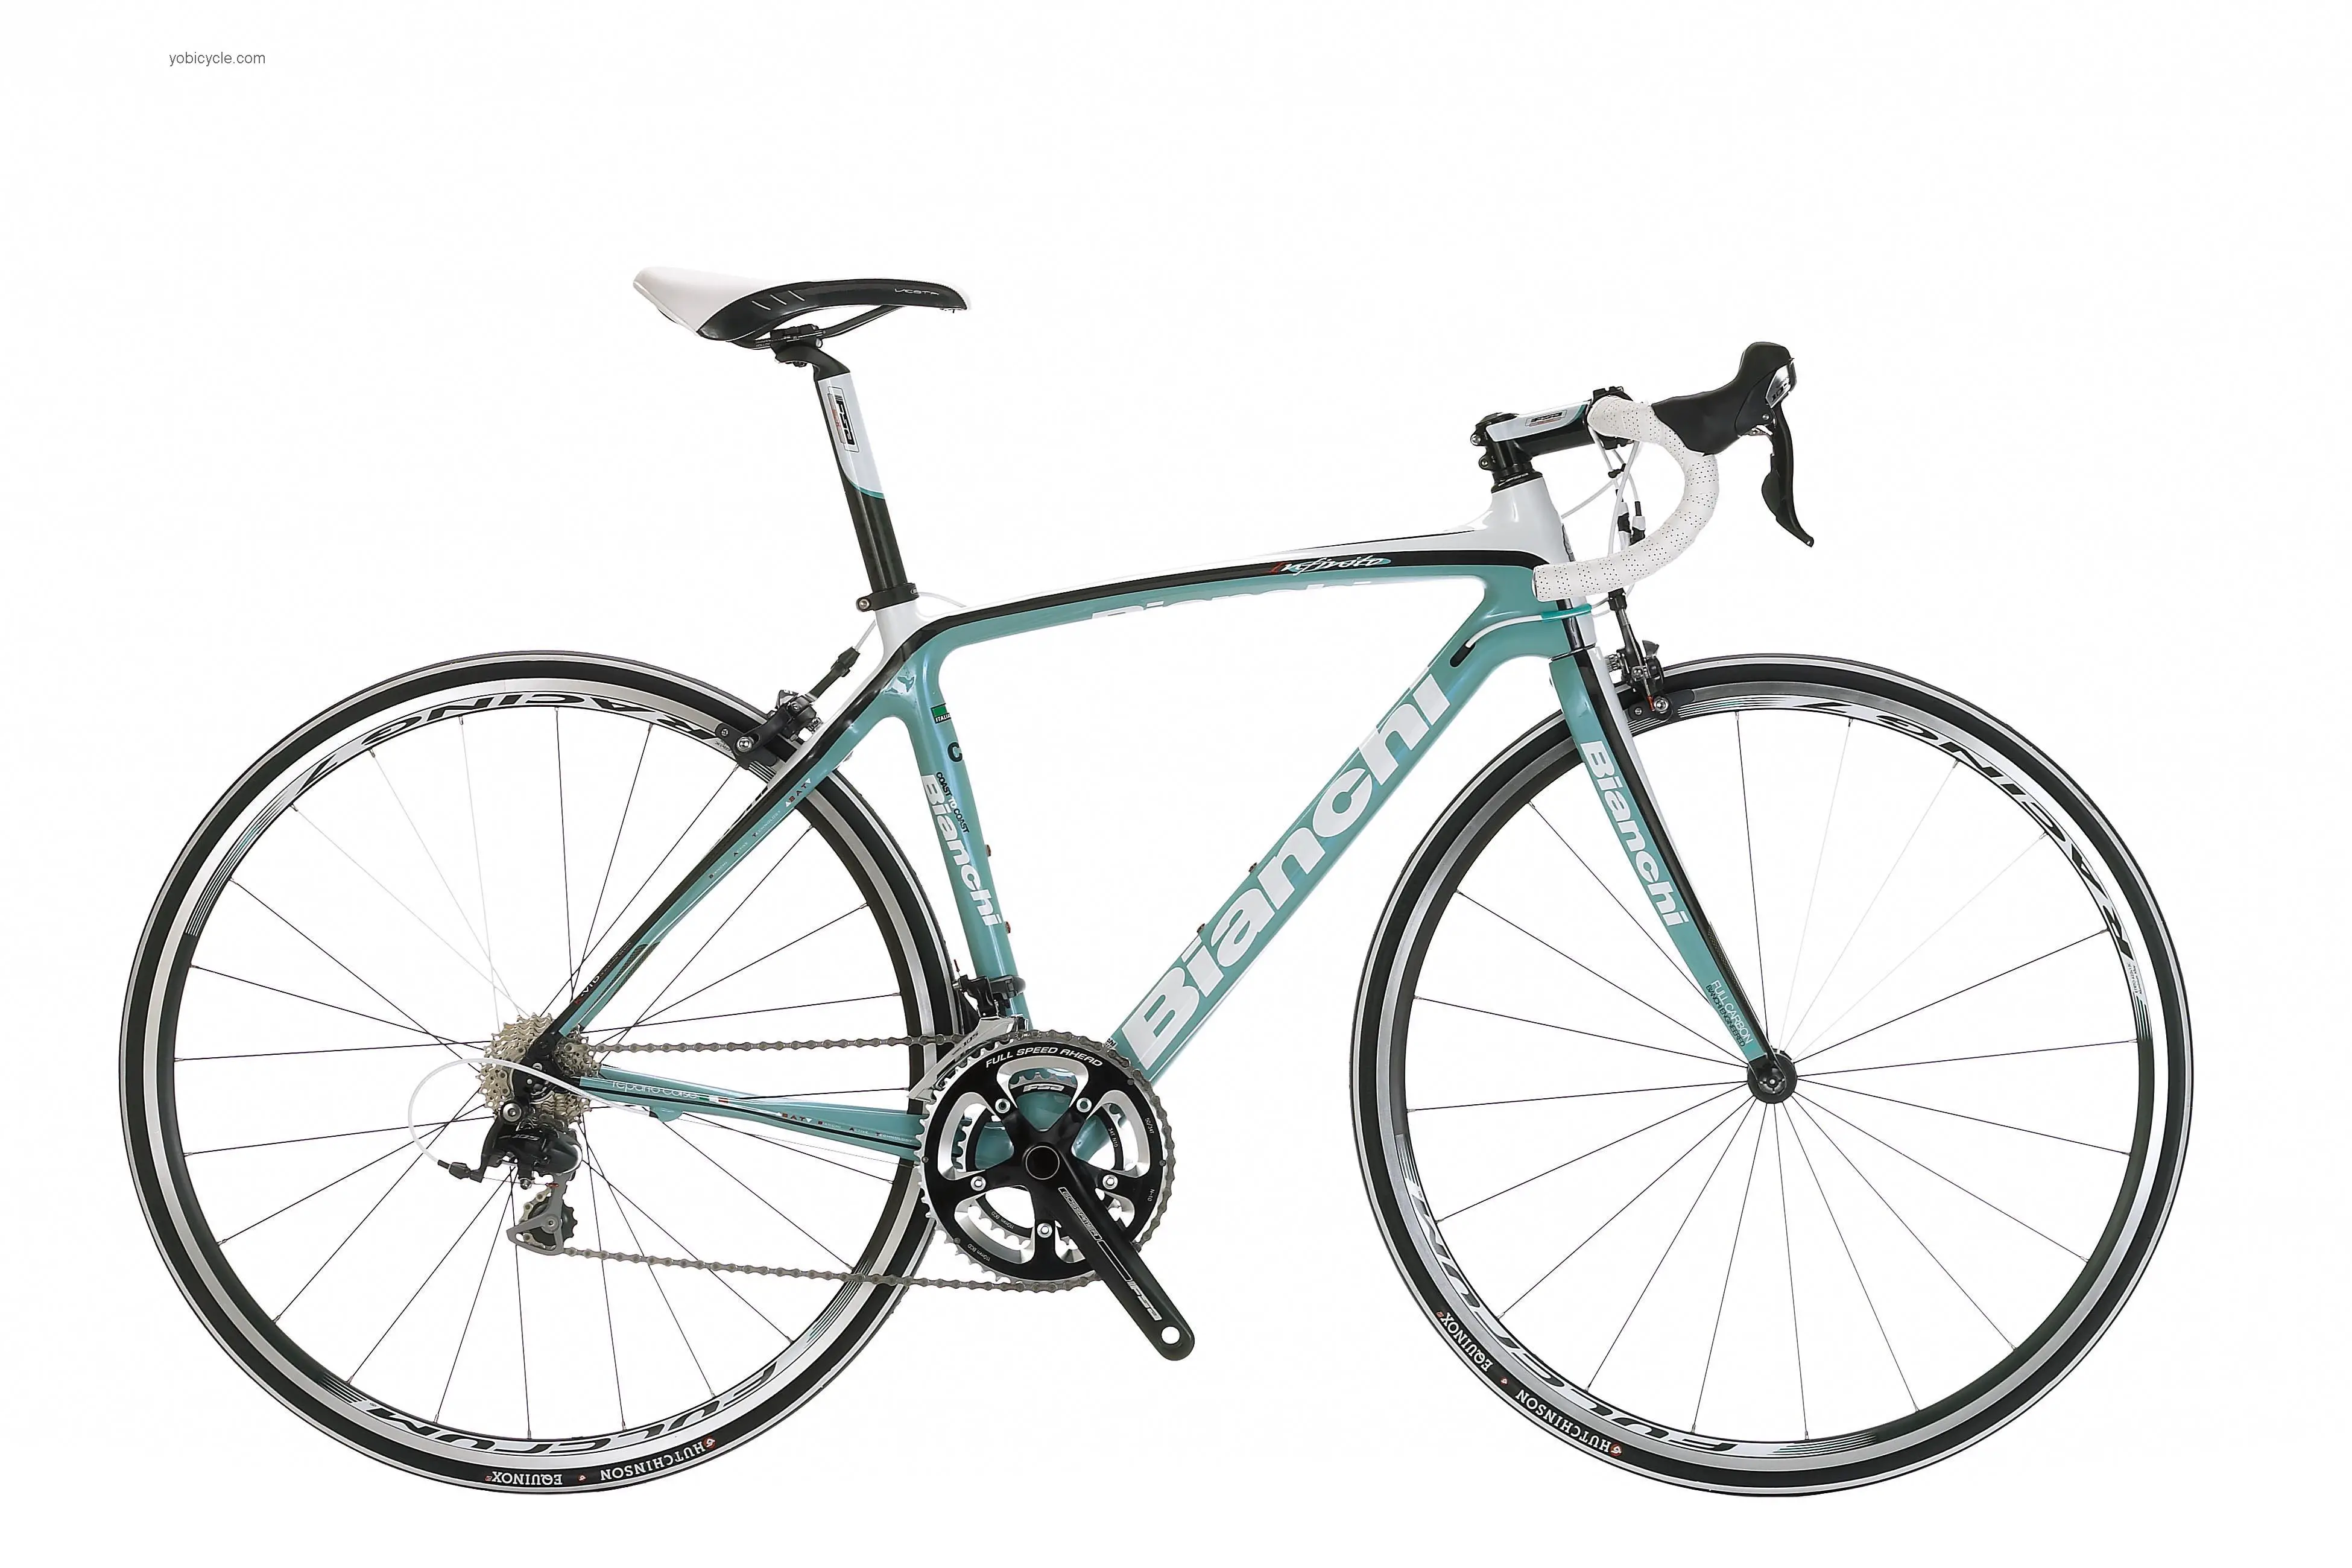 Bianchi Infinito Dama 105 competitors and comparison tool online specs and performance